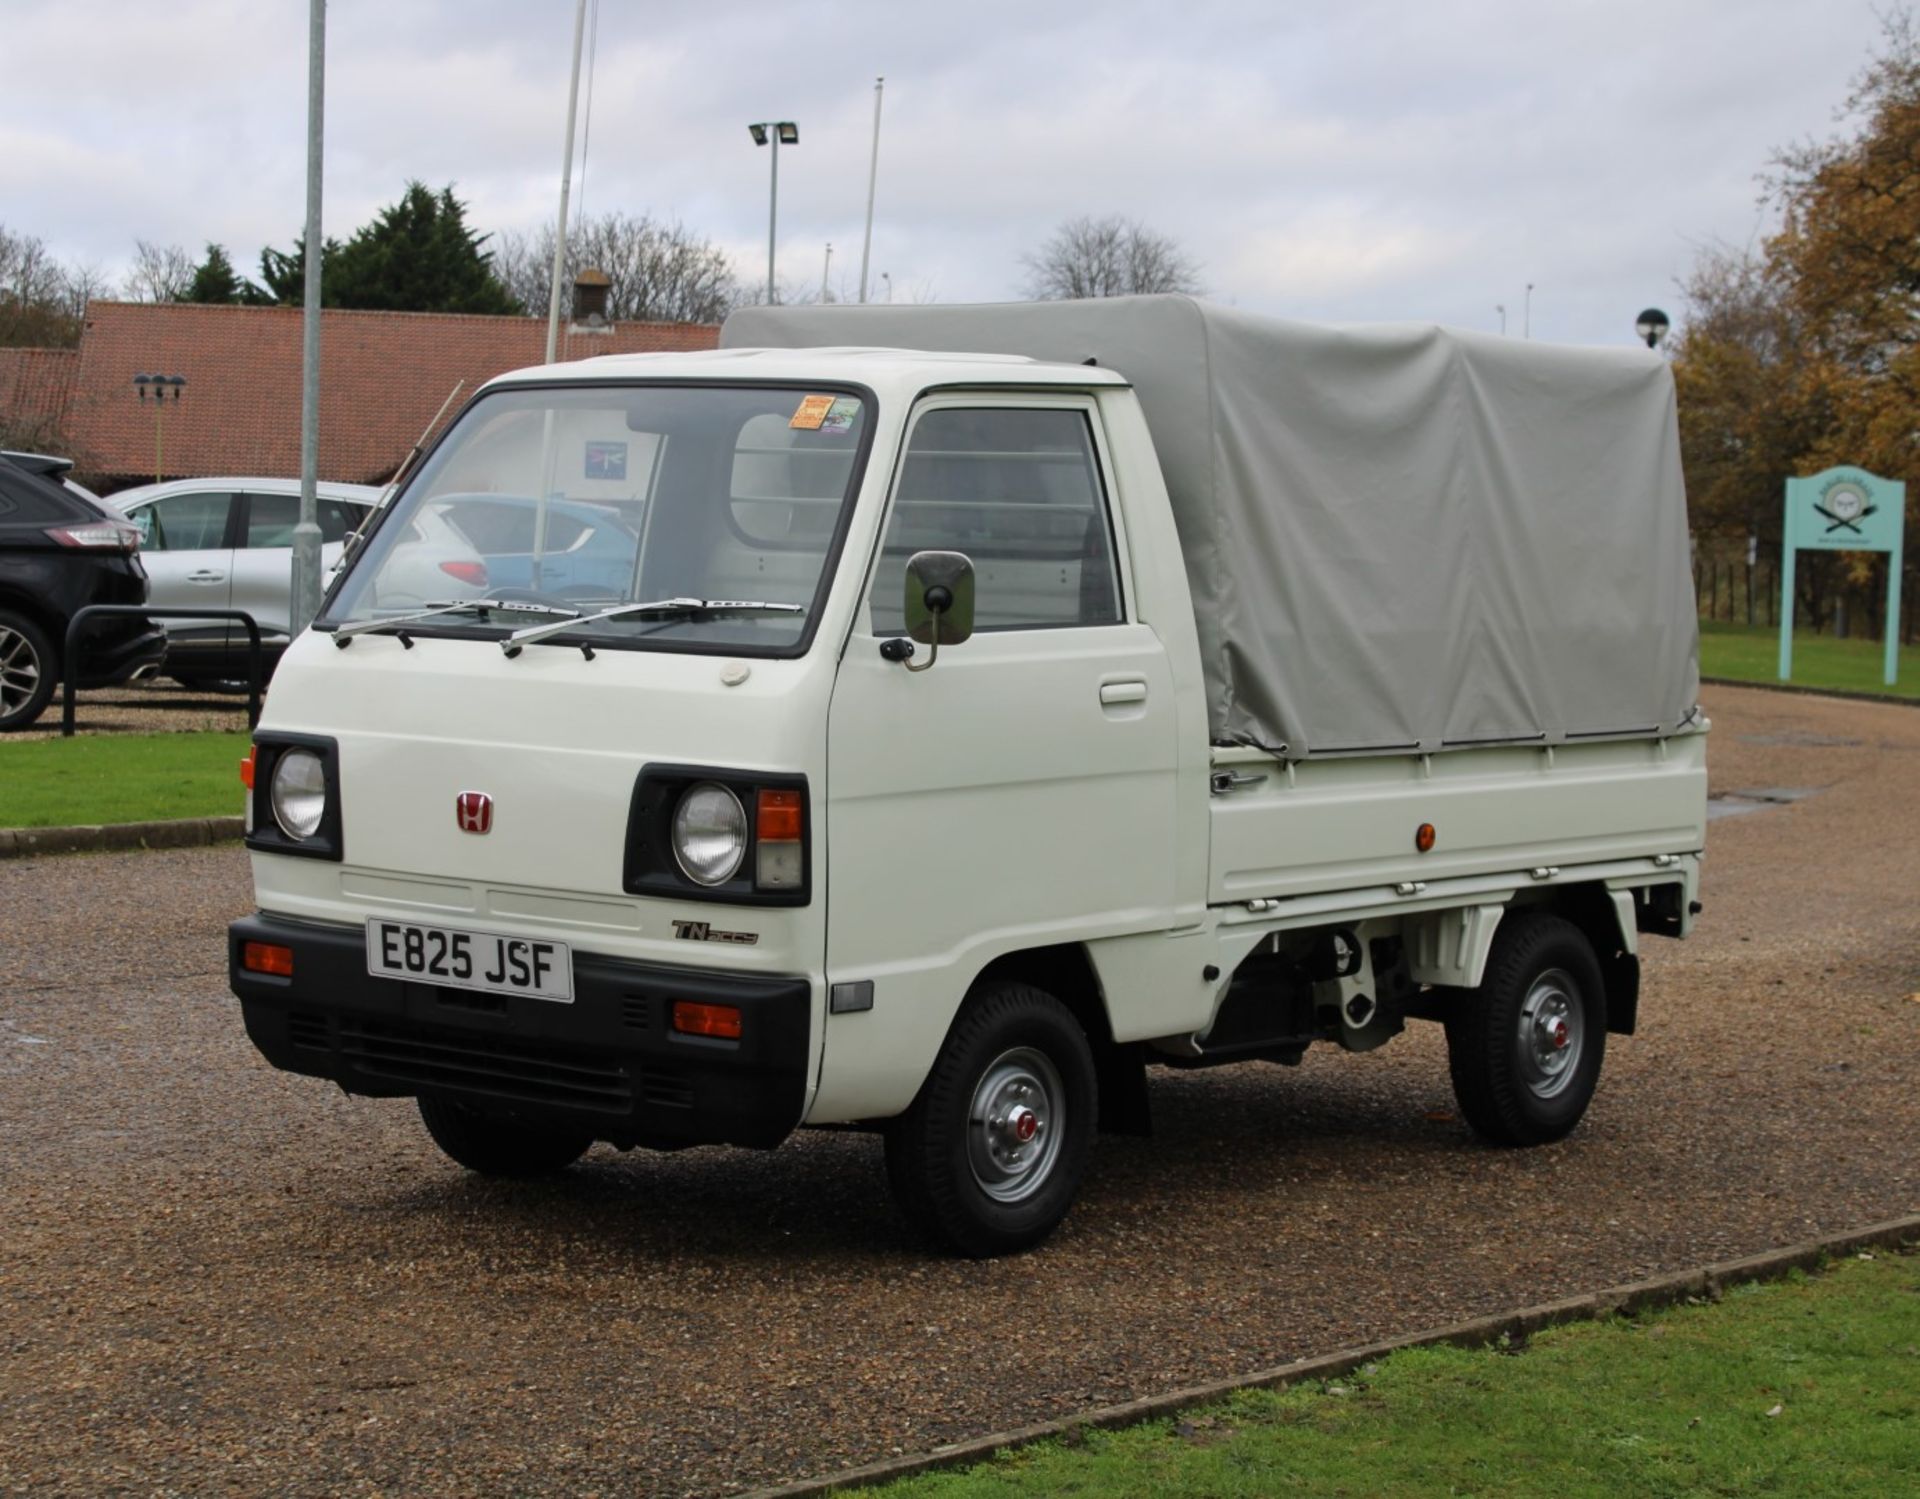 1987 Honda Acty Pick-up - Image 2 of 27